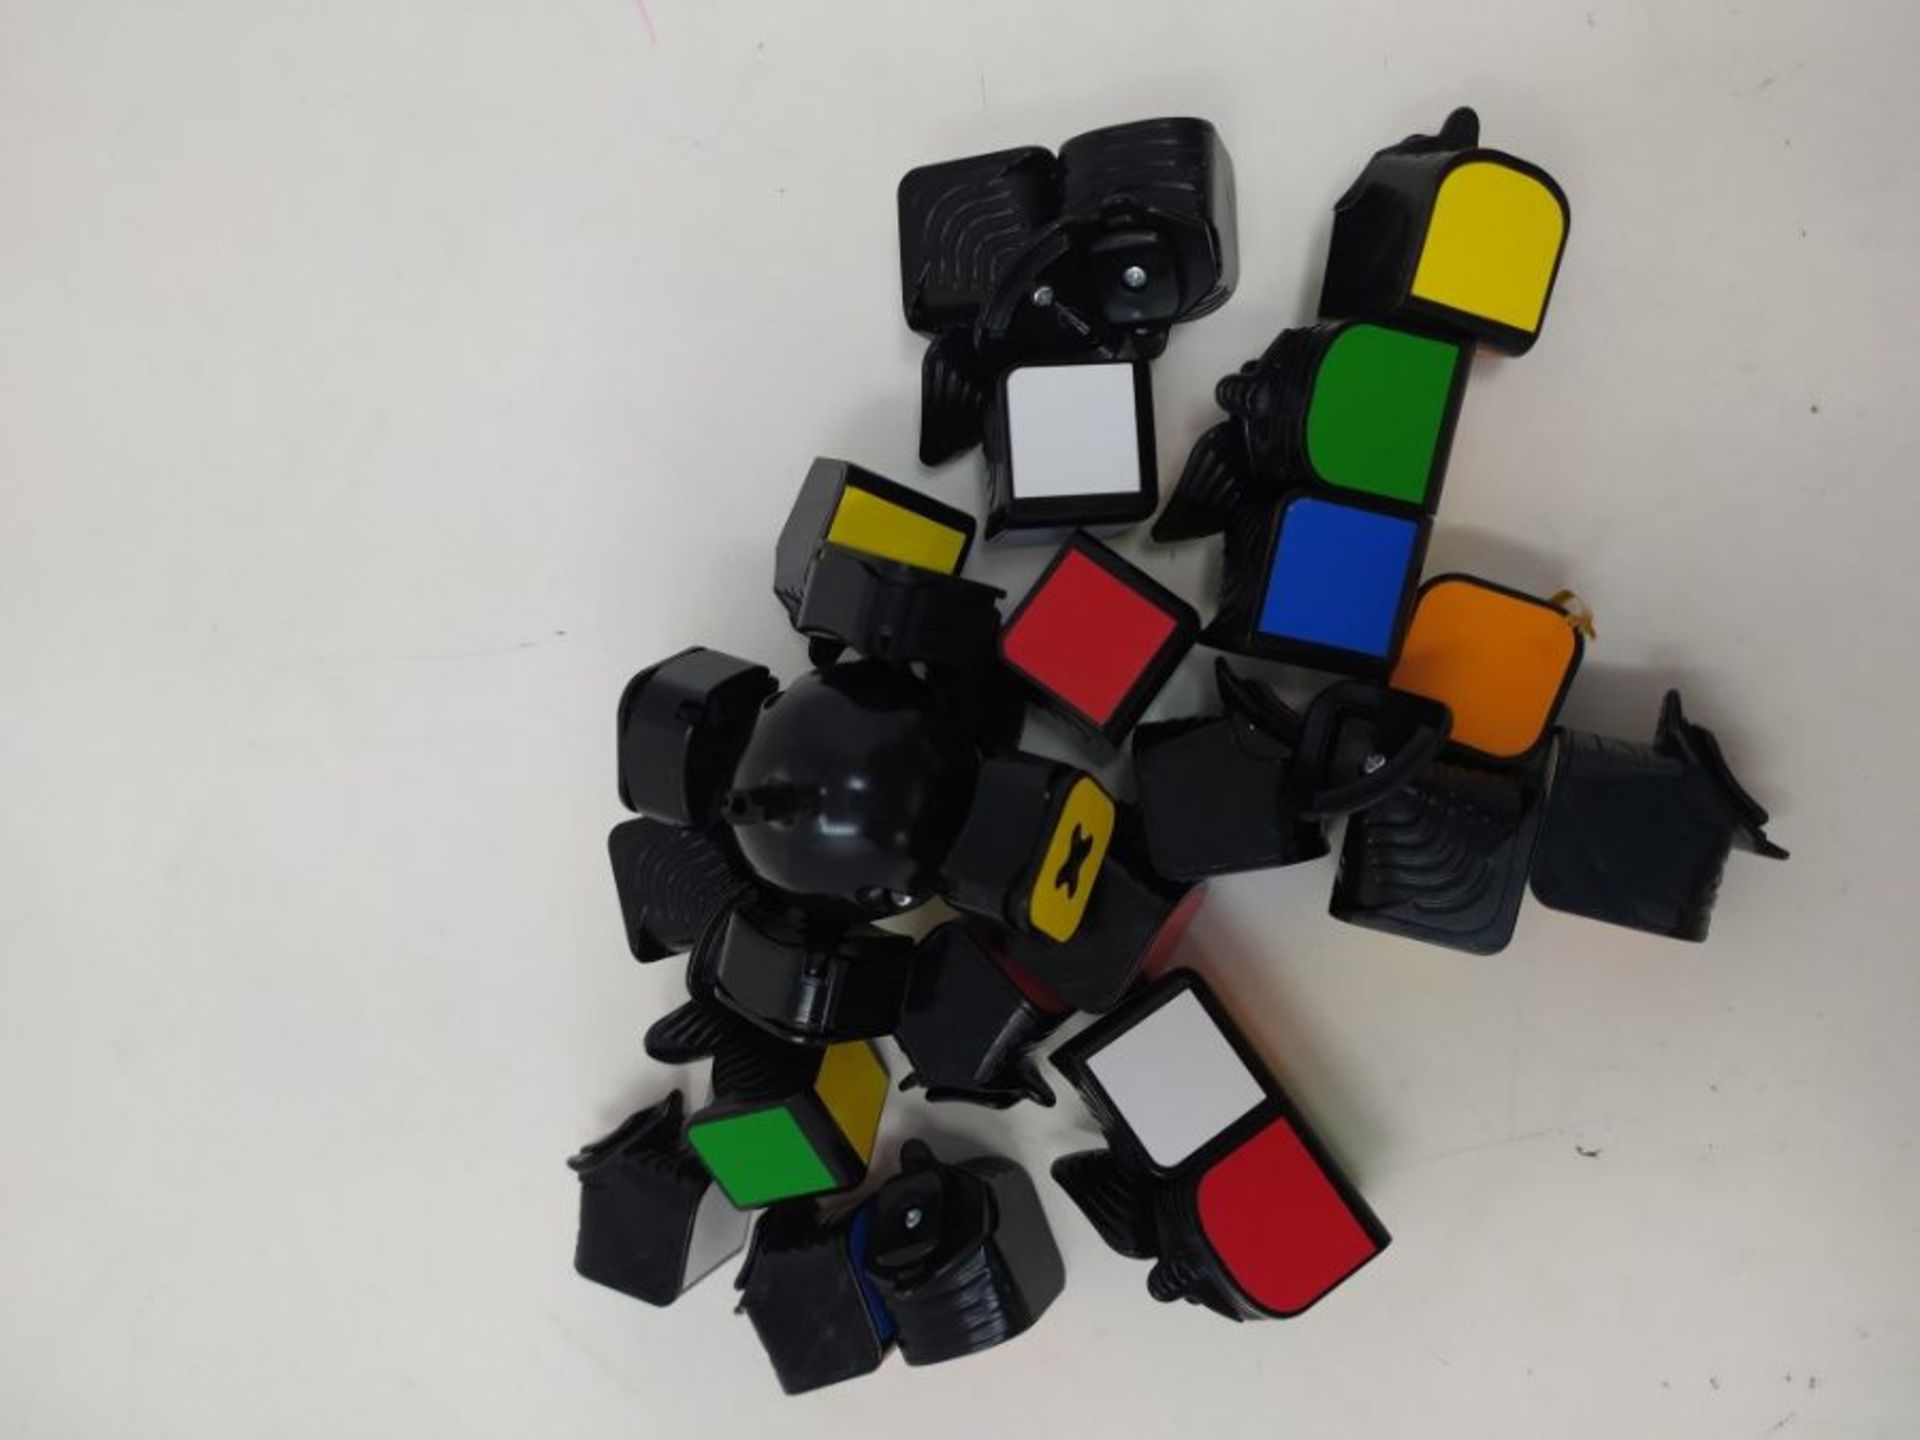 Rubikâ¬ "!s Connected - The Connected Electronic Rubikâ¬ "!s Cube That Allows Yo - Image 2 of 2